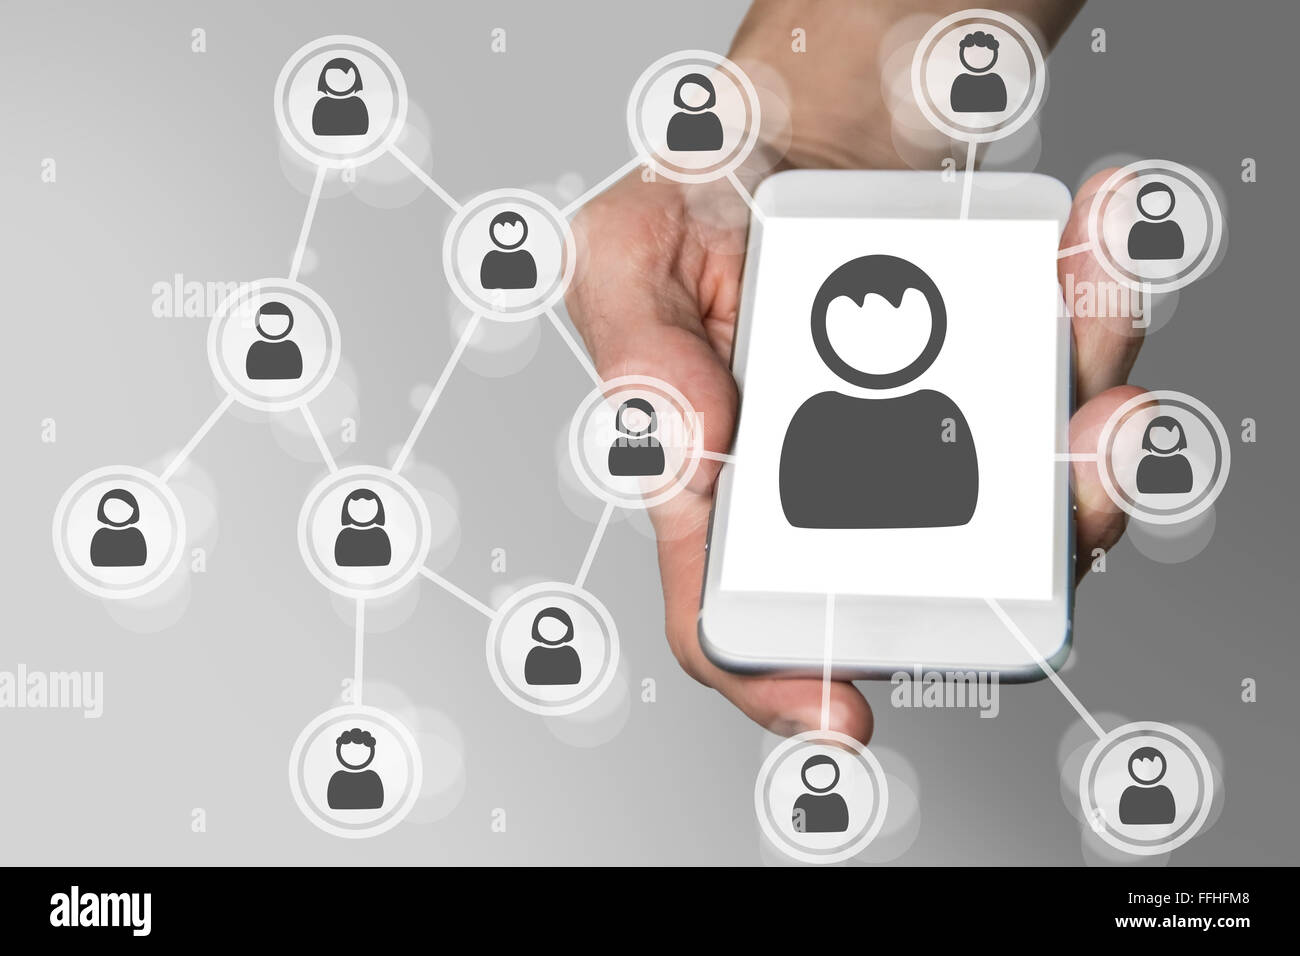 Social network on mobile device concept like smartphone Stock Photo